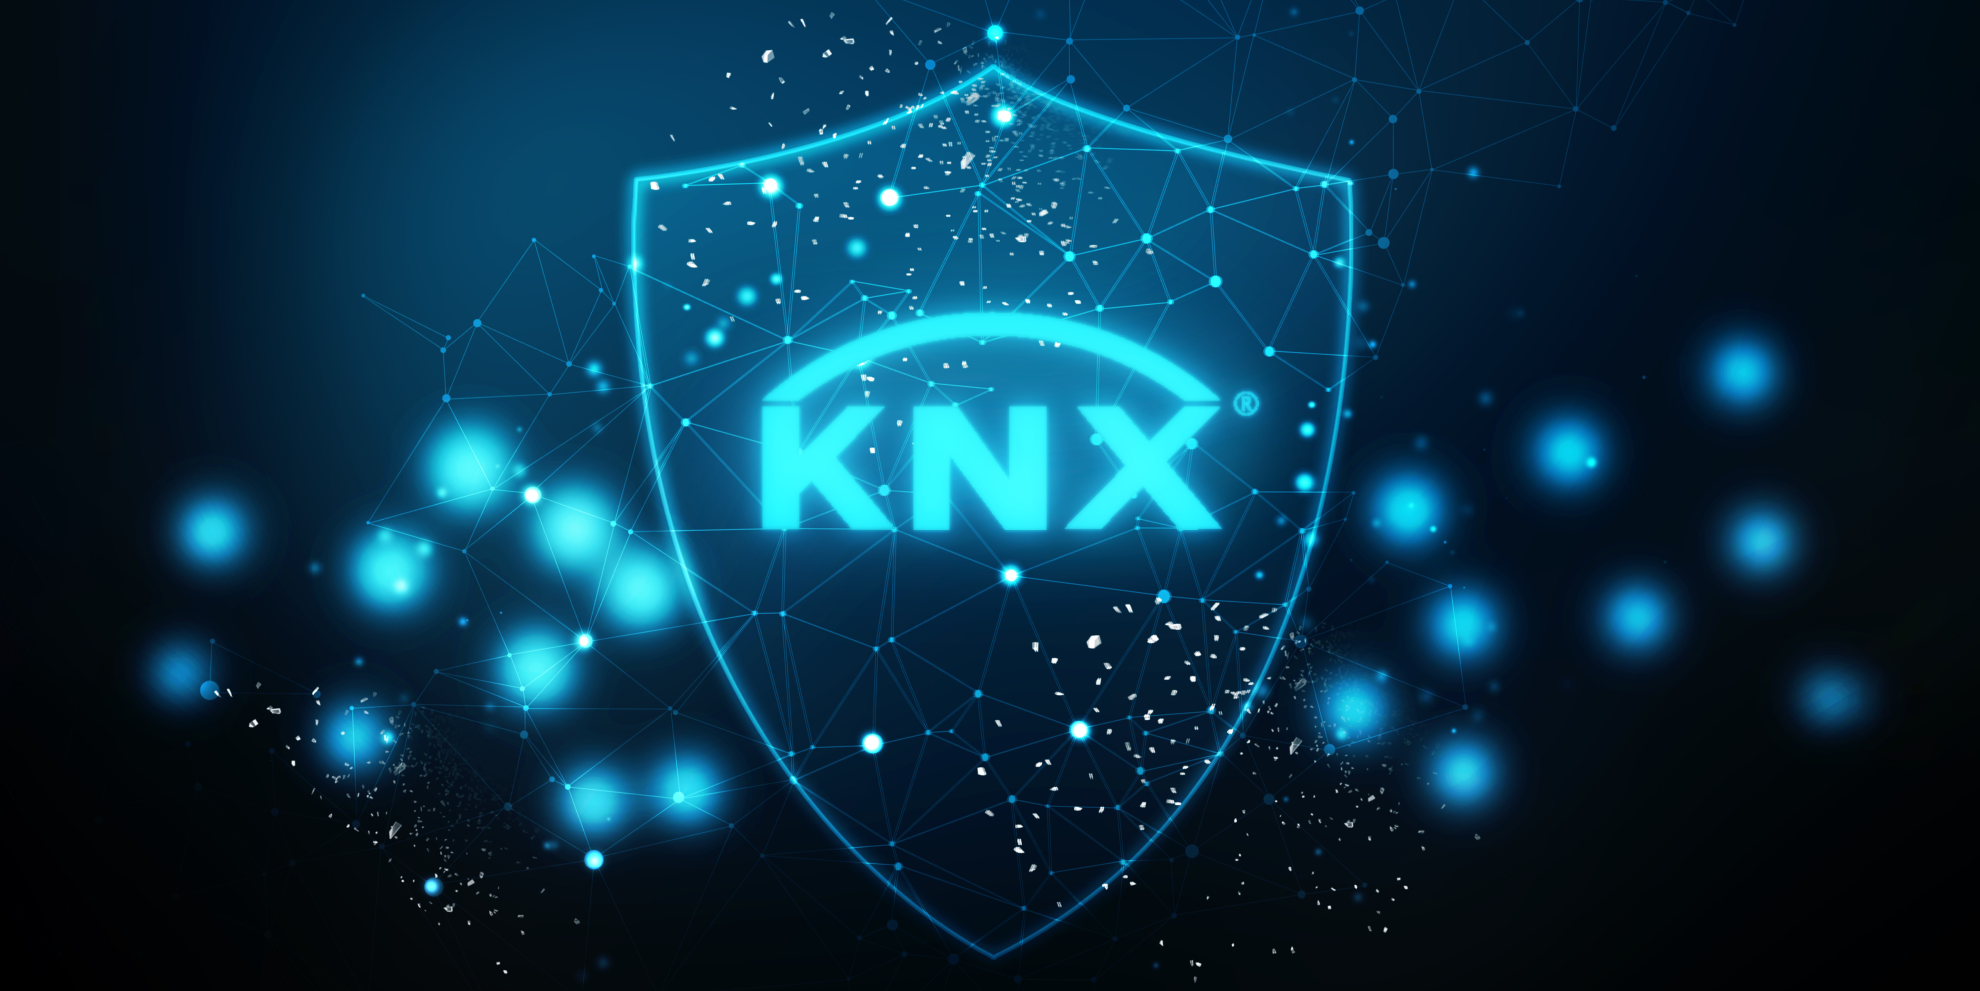 KNX Secure Day on June 29th - Security for your smart home and smart building made easy